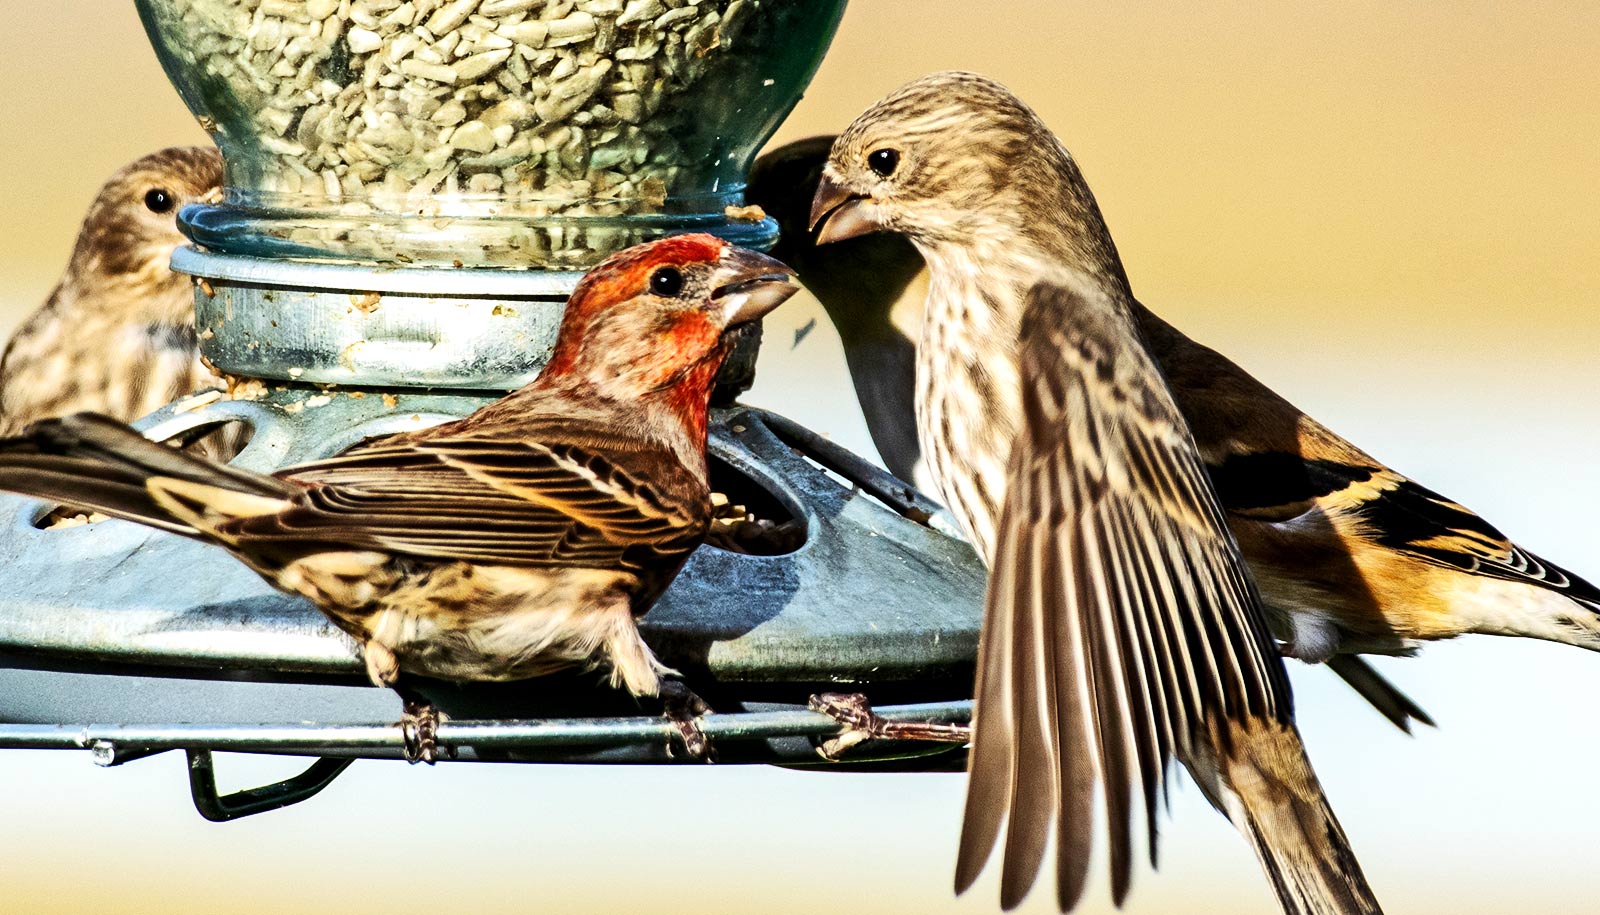 Sick house finches skip social distancing and get close